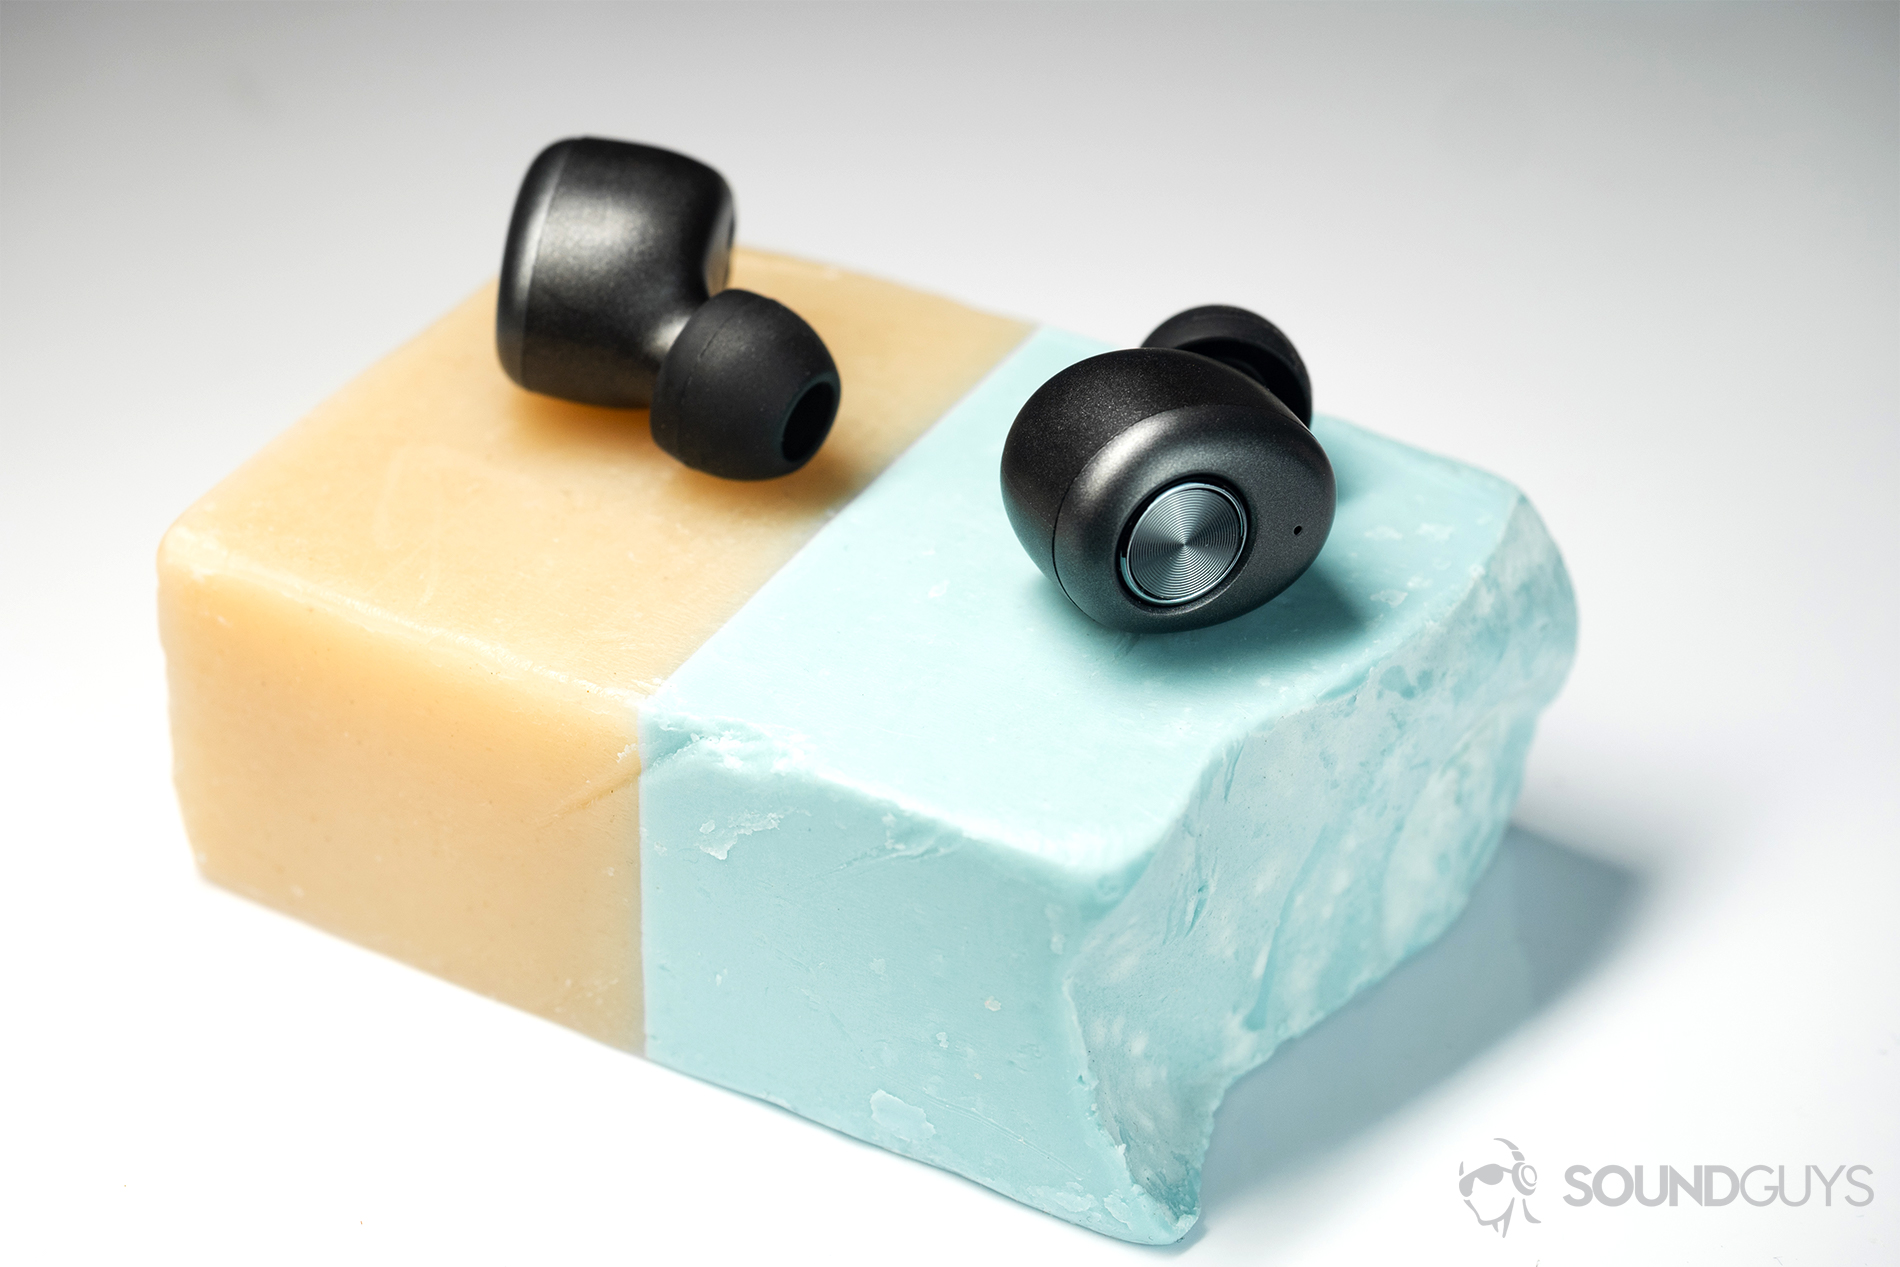 Monoprice True Wireless: Earbuds on a split-color bar of soap on a white surface.